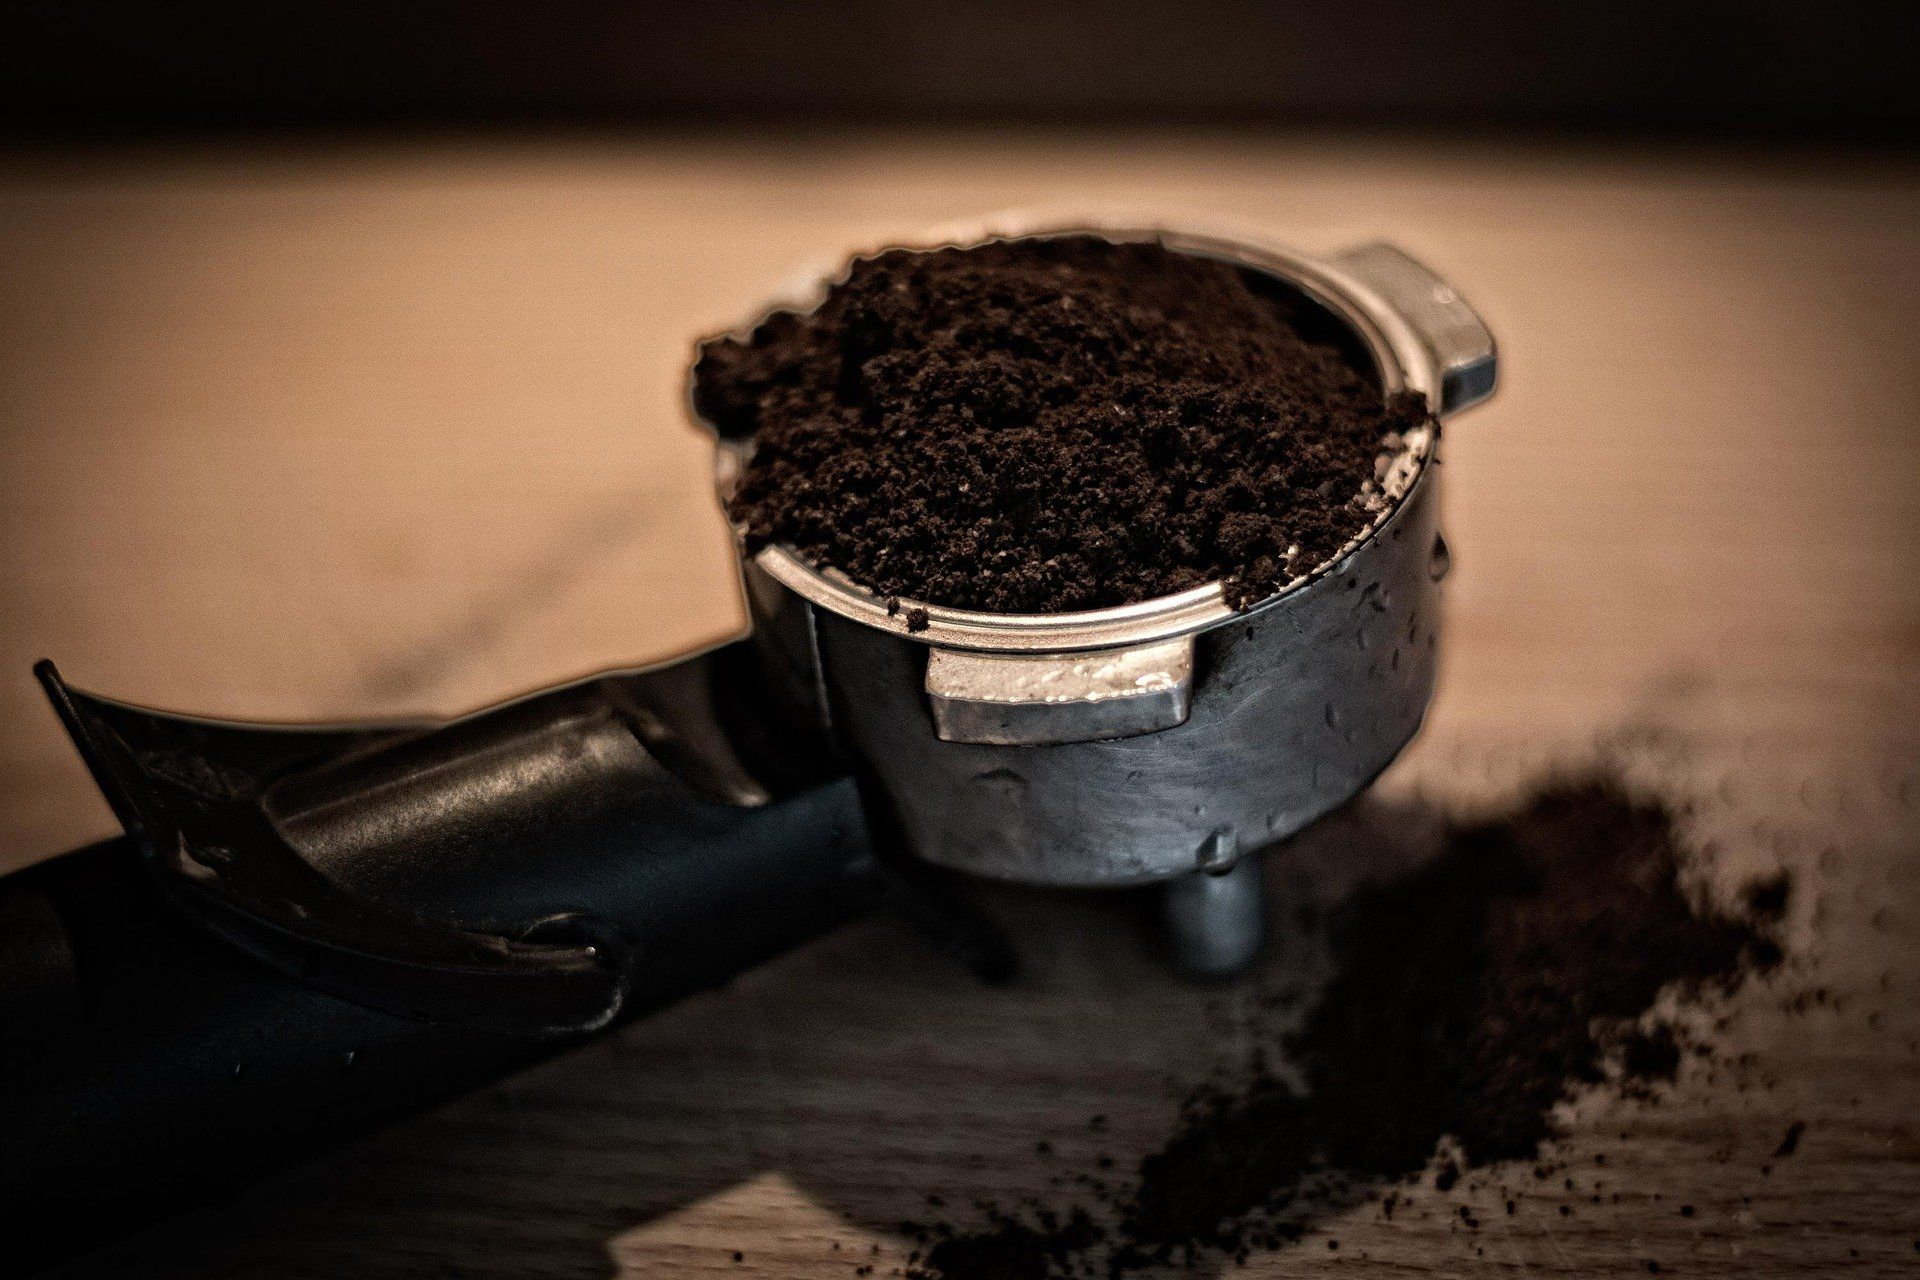 Is Coffee Ground Too Precious To Be Waste?